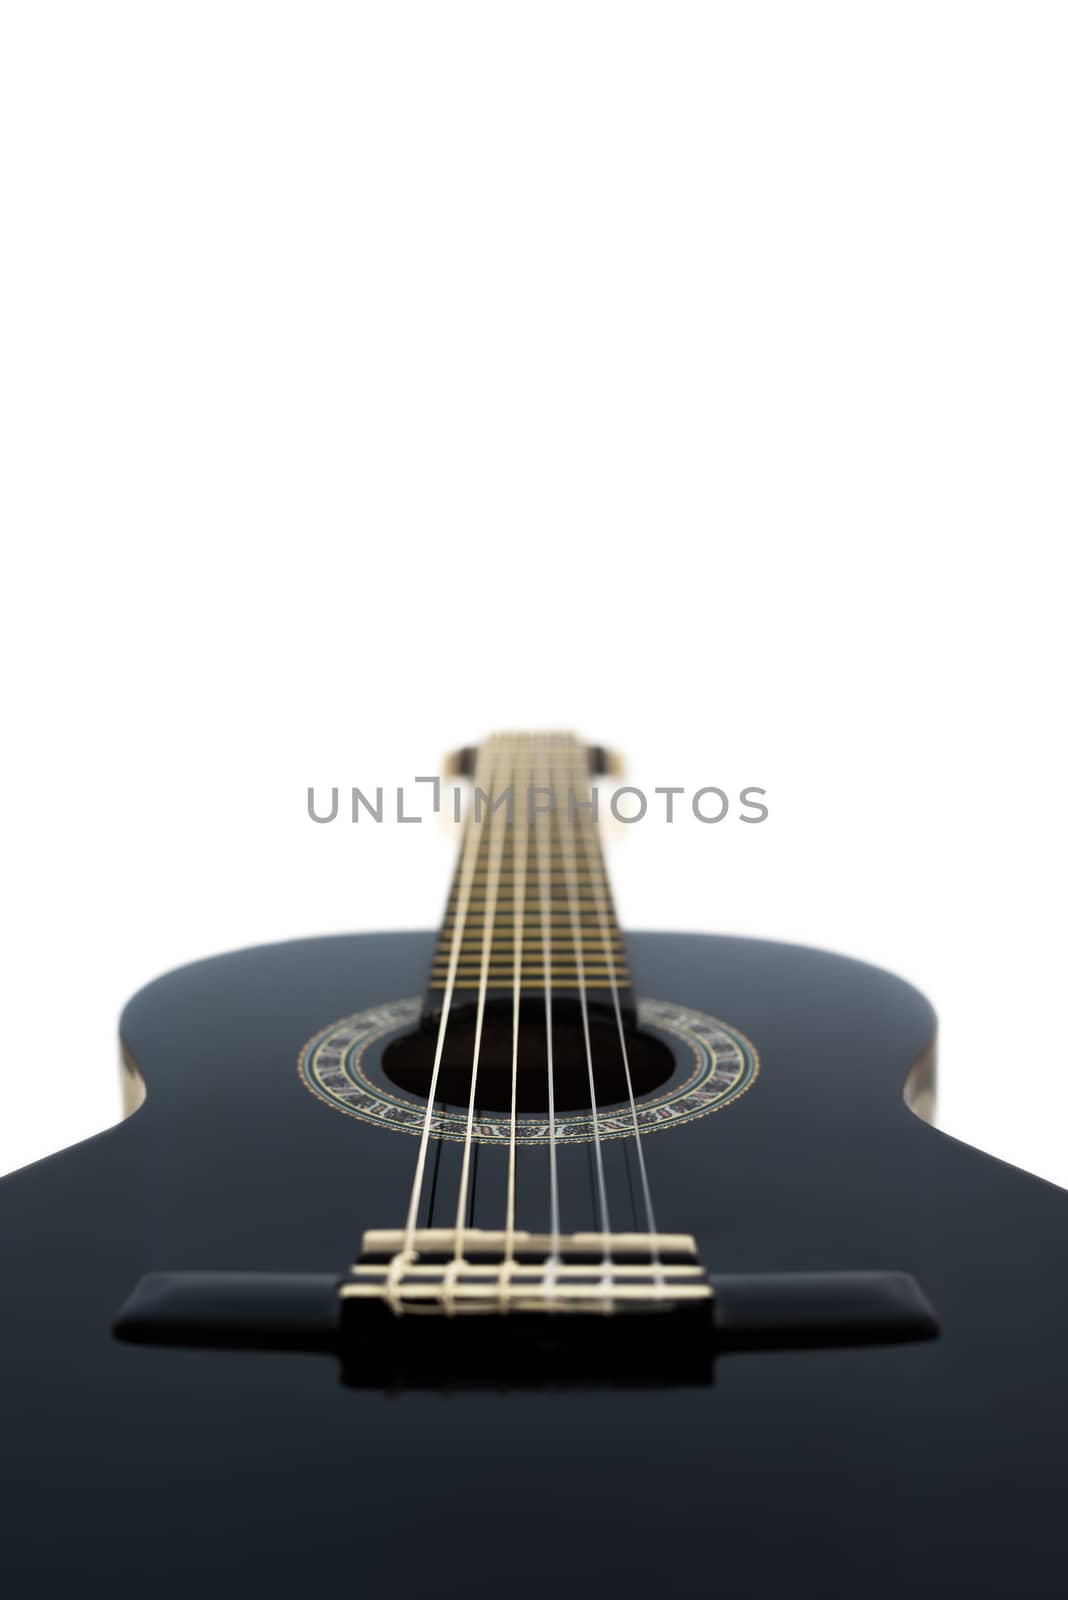 Detail of Black Wooden Classical Acoustic Guitar Isolated on a White Background